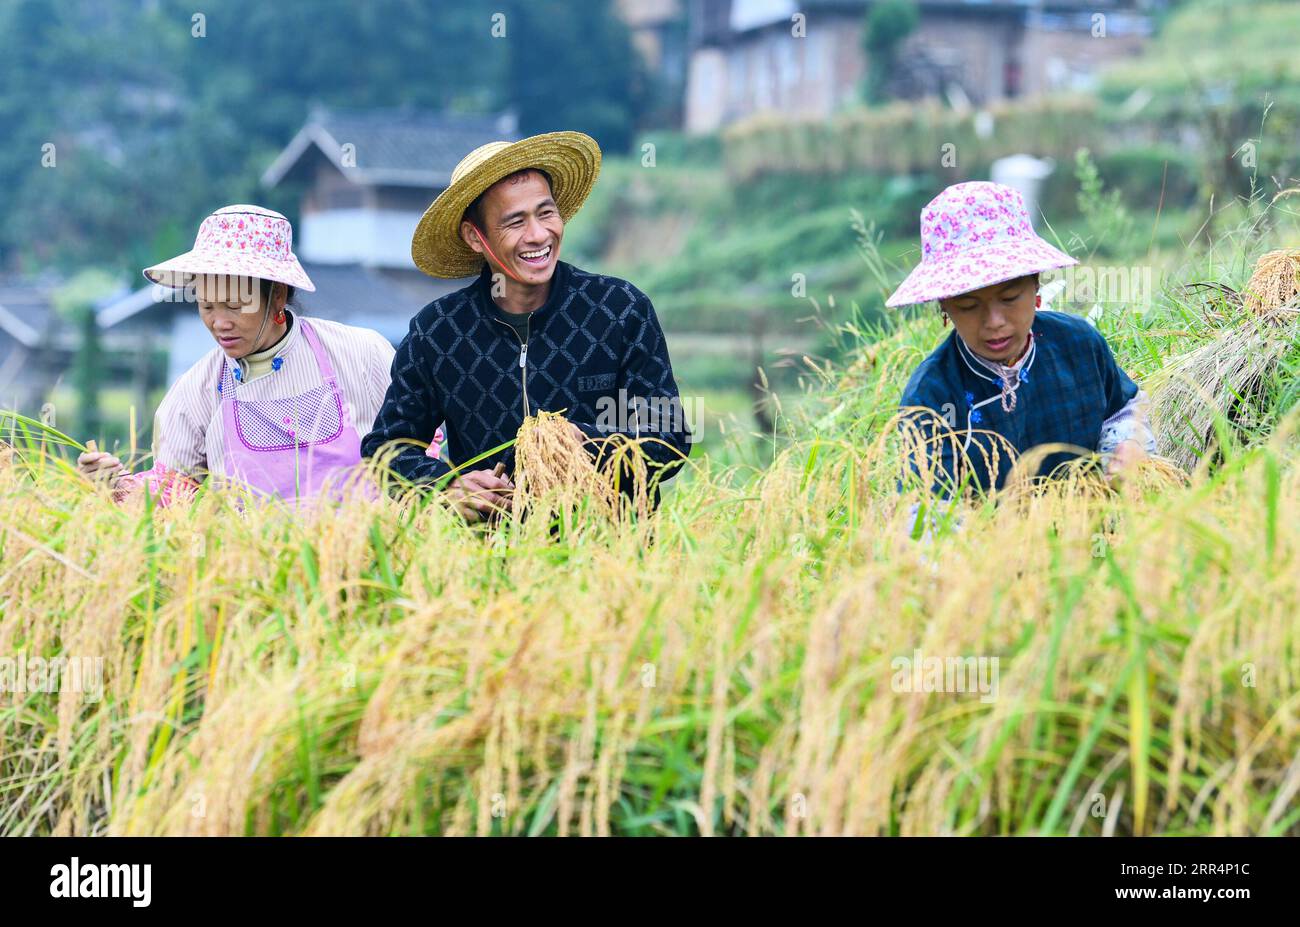 201210 -- BEIJING, Dec. 10, 2020 -- Farmers harvest rice at Jiache Village, Jiabang Township, Congjiang County of southwest China s Guizhou Province, Sept. 19, 2020. China s grain output reached nearly 670 billion kg in 2020, up 5.65 billion kg, or 0.9 percent, from last year, the National Bureau of Statistics NBS said on Thursday. This marks the sixth consecutive year that the country s total grain production has exceeded 650 billion kg. The bumper harvest comes despite disrupted farming as a result of the COVID-19 epidemic, which has been held in check thanks to efforts to ensure the transpo Stock Photo